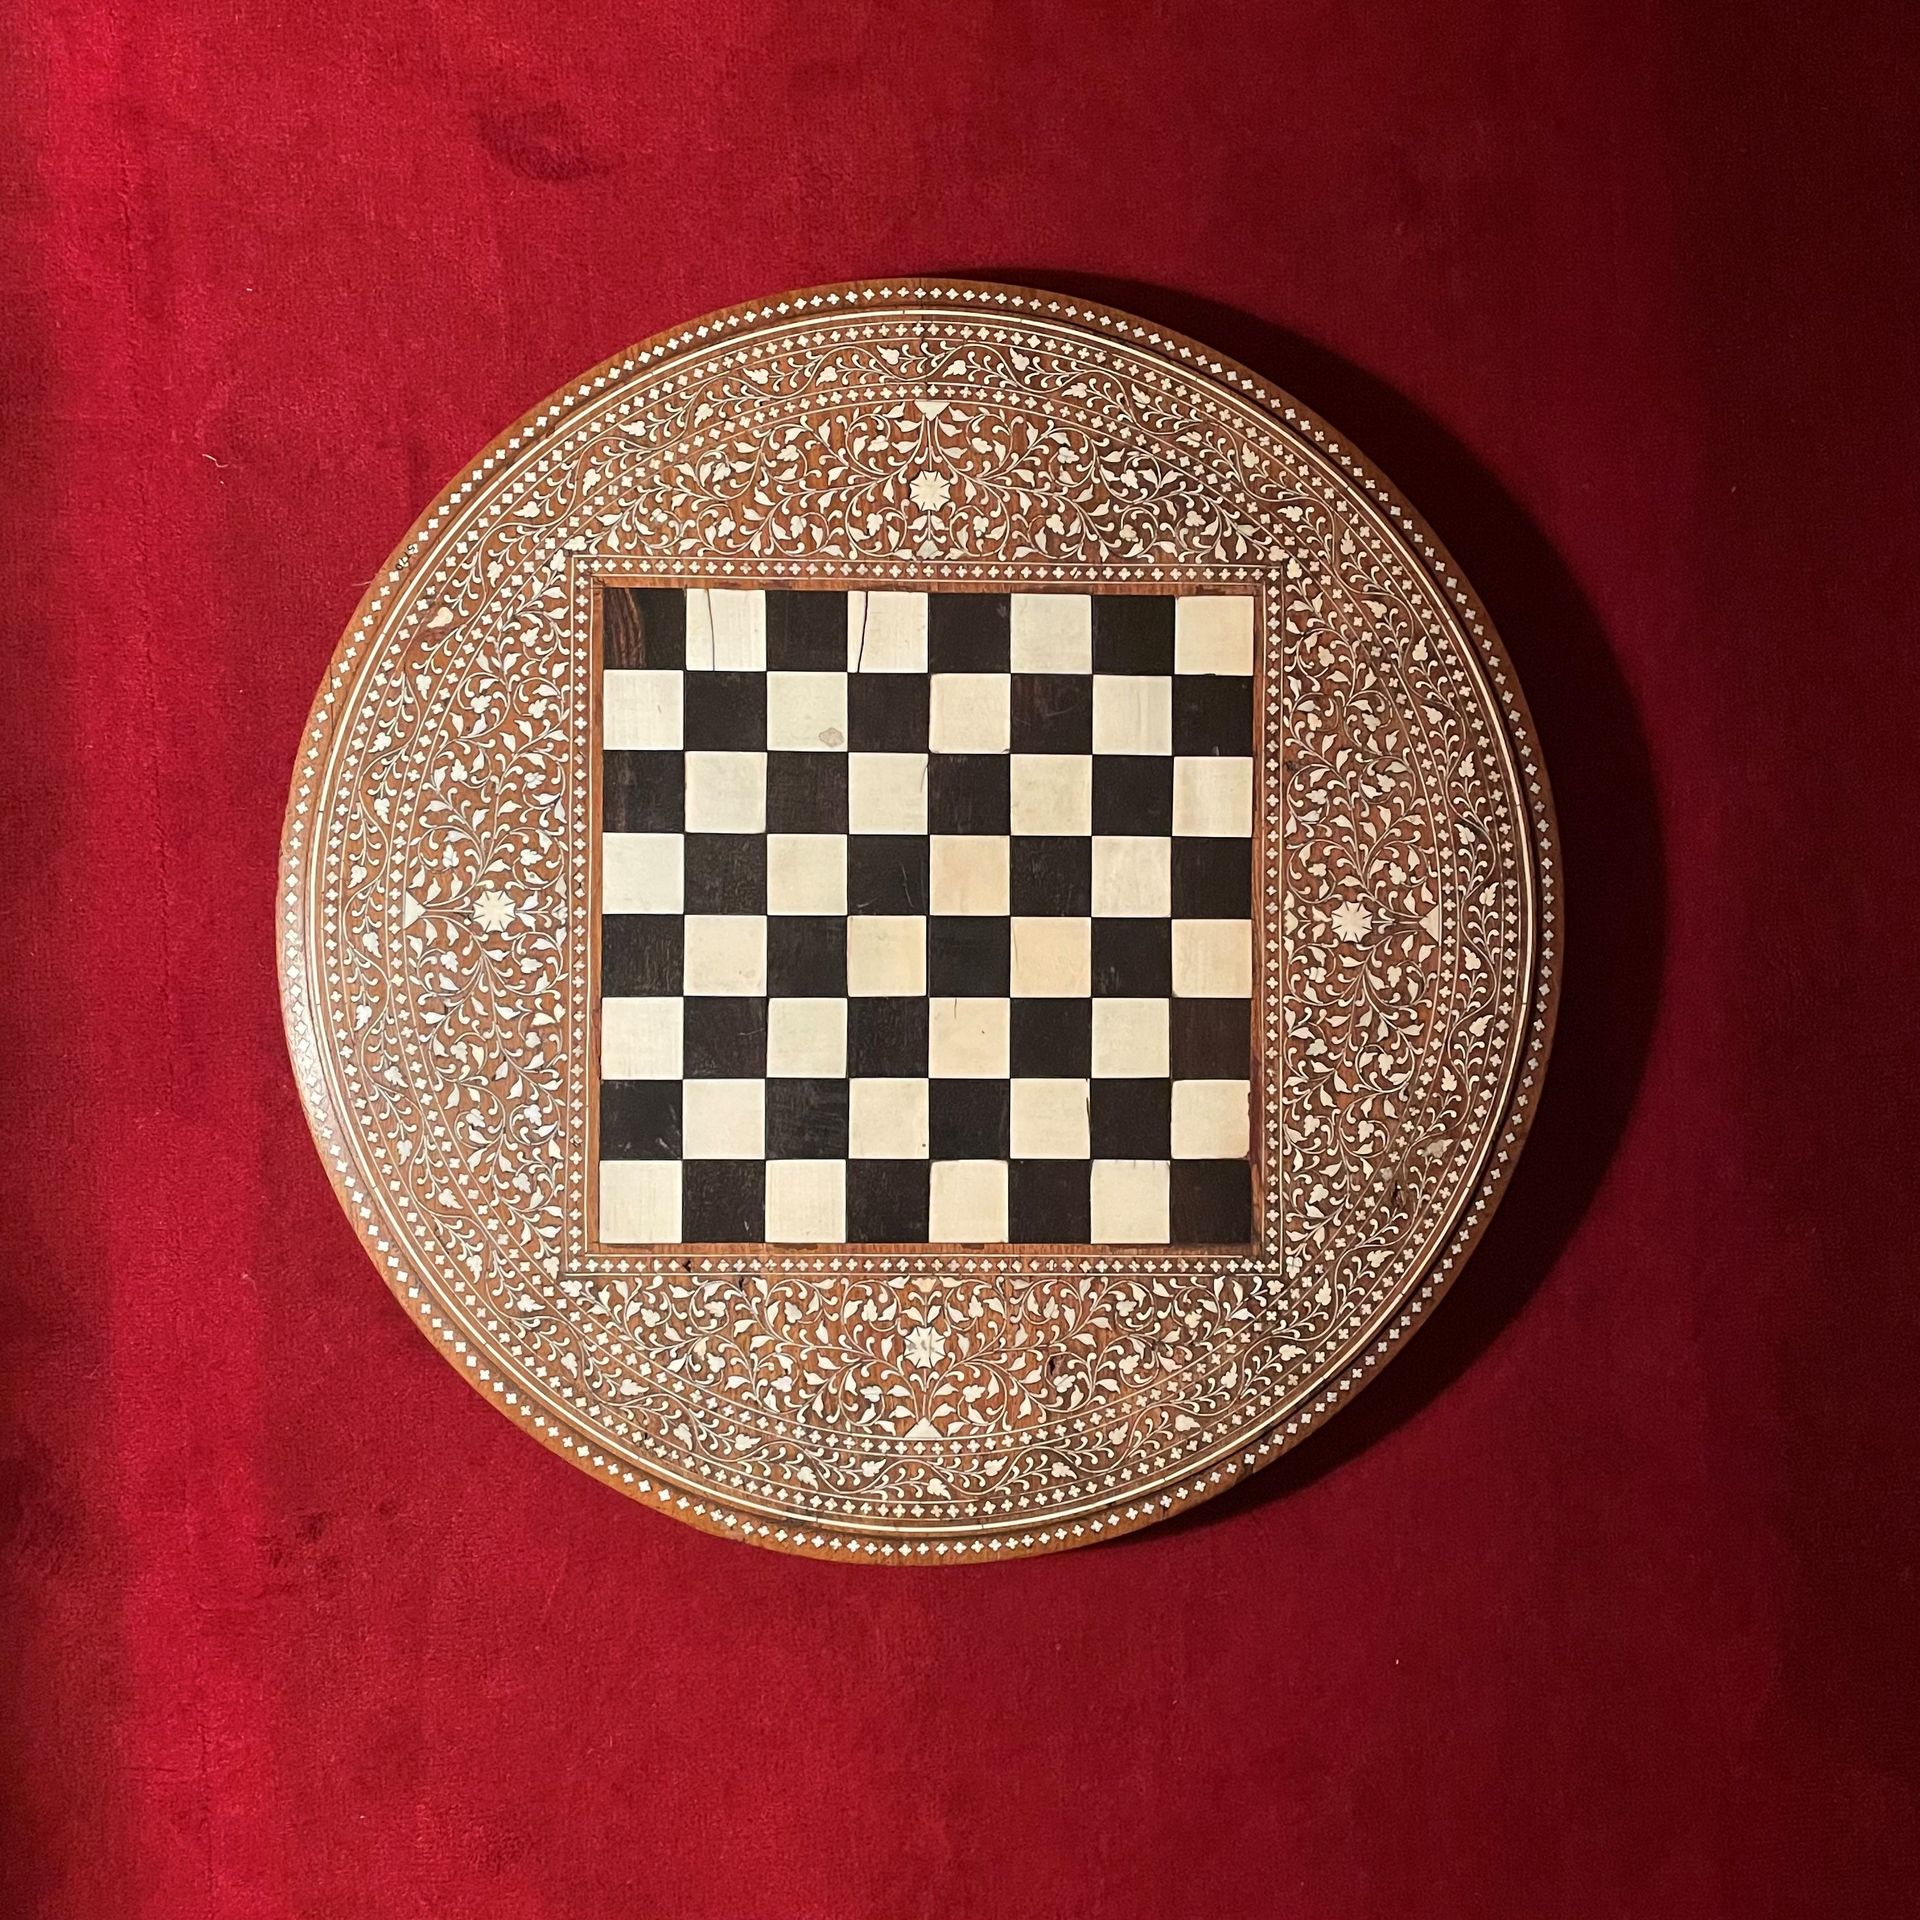 Null CHESS TABLE

India, 19th century

Inlaid with ivory and ebony

W: 60,5 cm

&hellip;